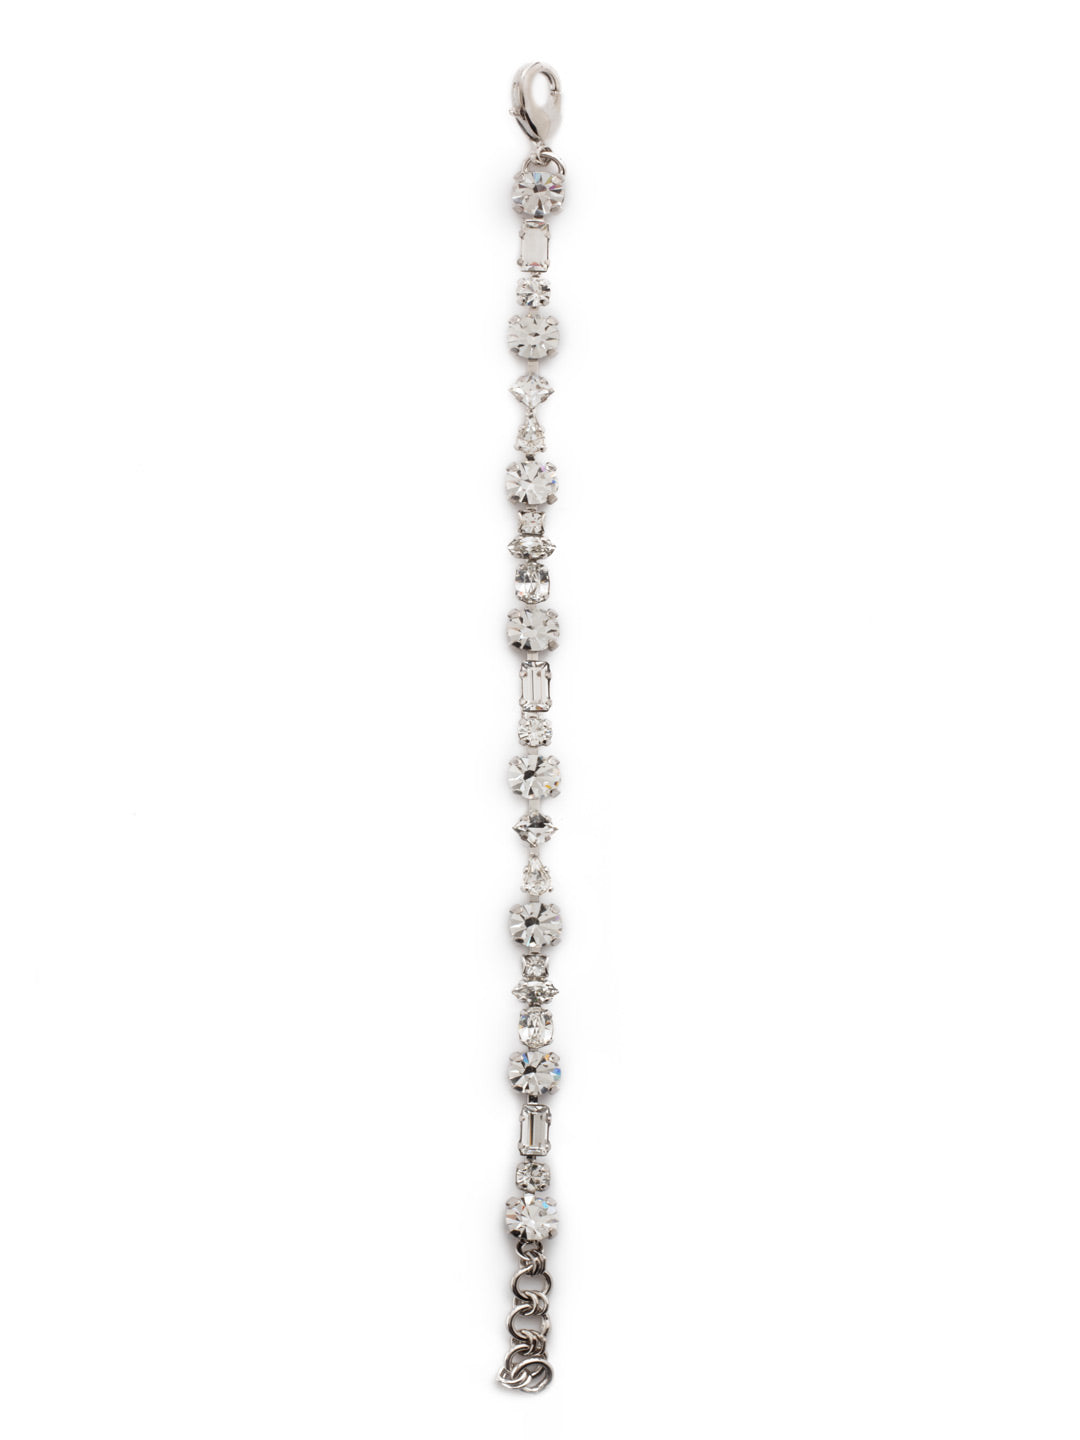 Geometric Crystal Line Tennis Bracelet - BDB7RHCRY - <p>Our classic line bracelet with a geometric twist! This rendition features alternating round, teardrop, and baguette cut crystals. From Sorrelli's Crystal collection in our Palladium Silver-tone finish.</p>